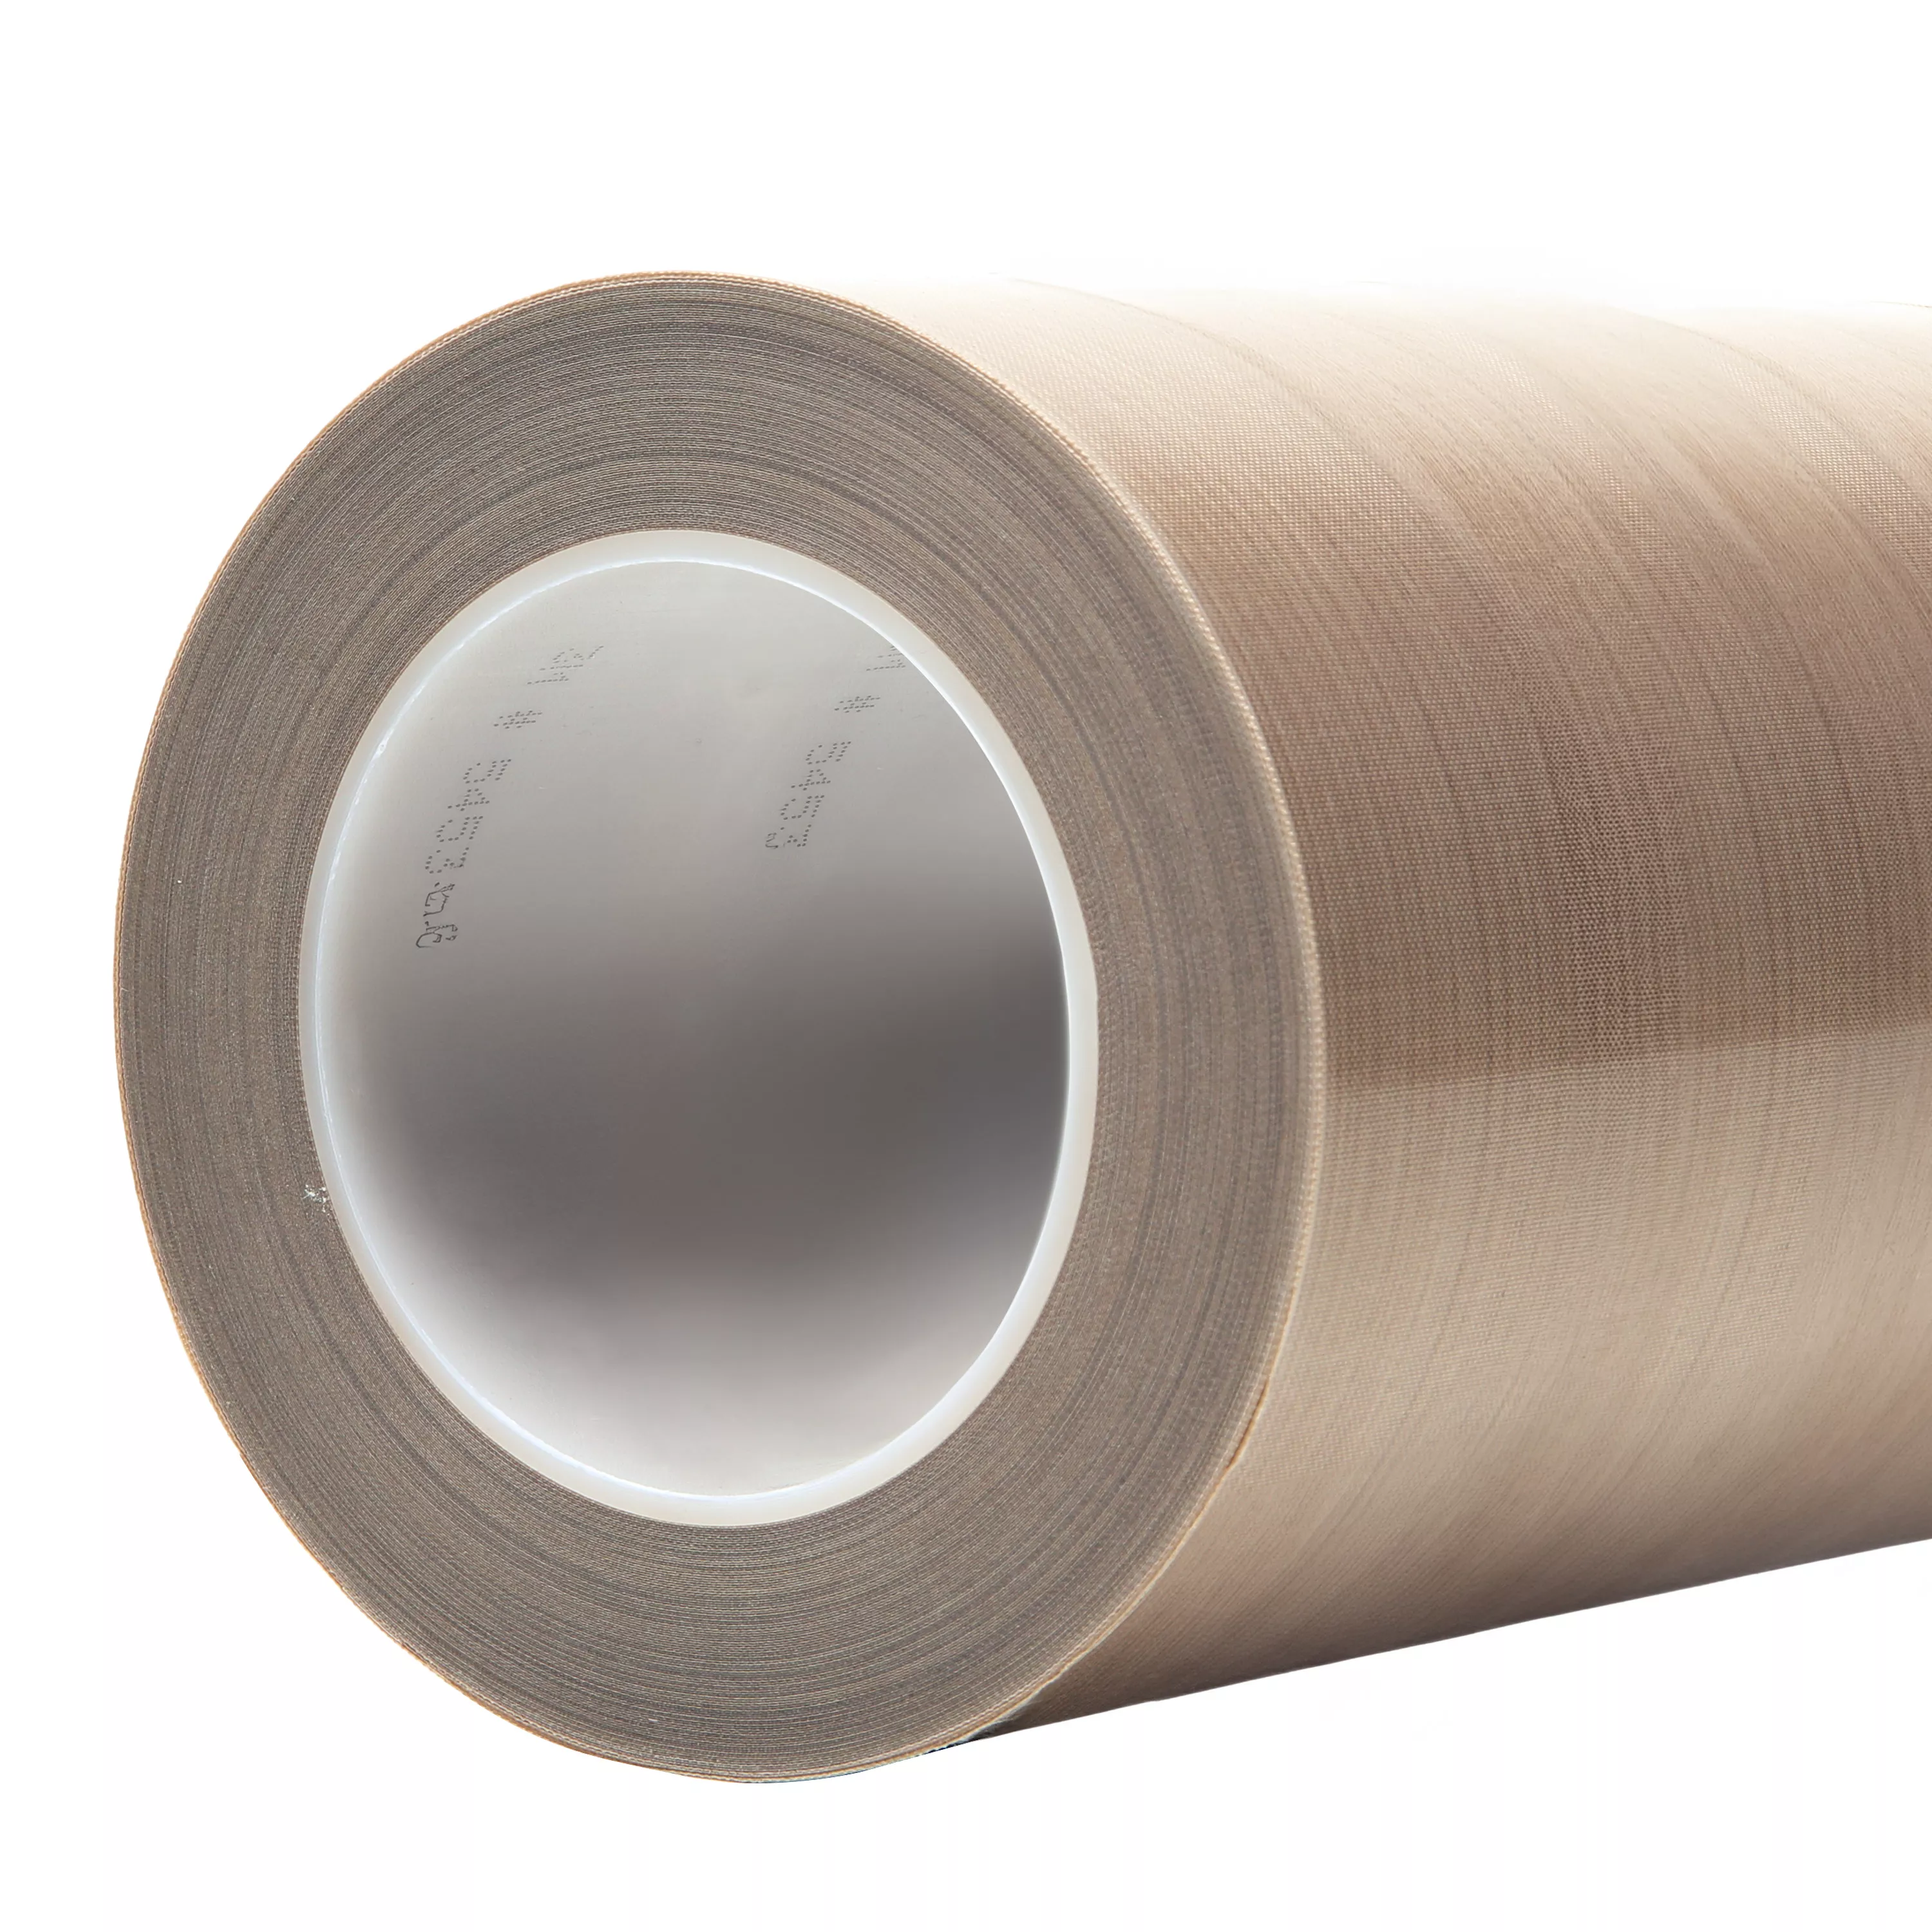 3M™ PTFE Glass Cloth Tape 5453, Brown, 10 in x 36 yd, 8.2 mil, 1
Roll/Case